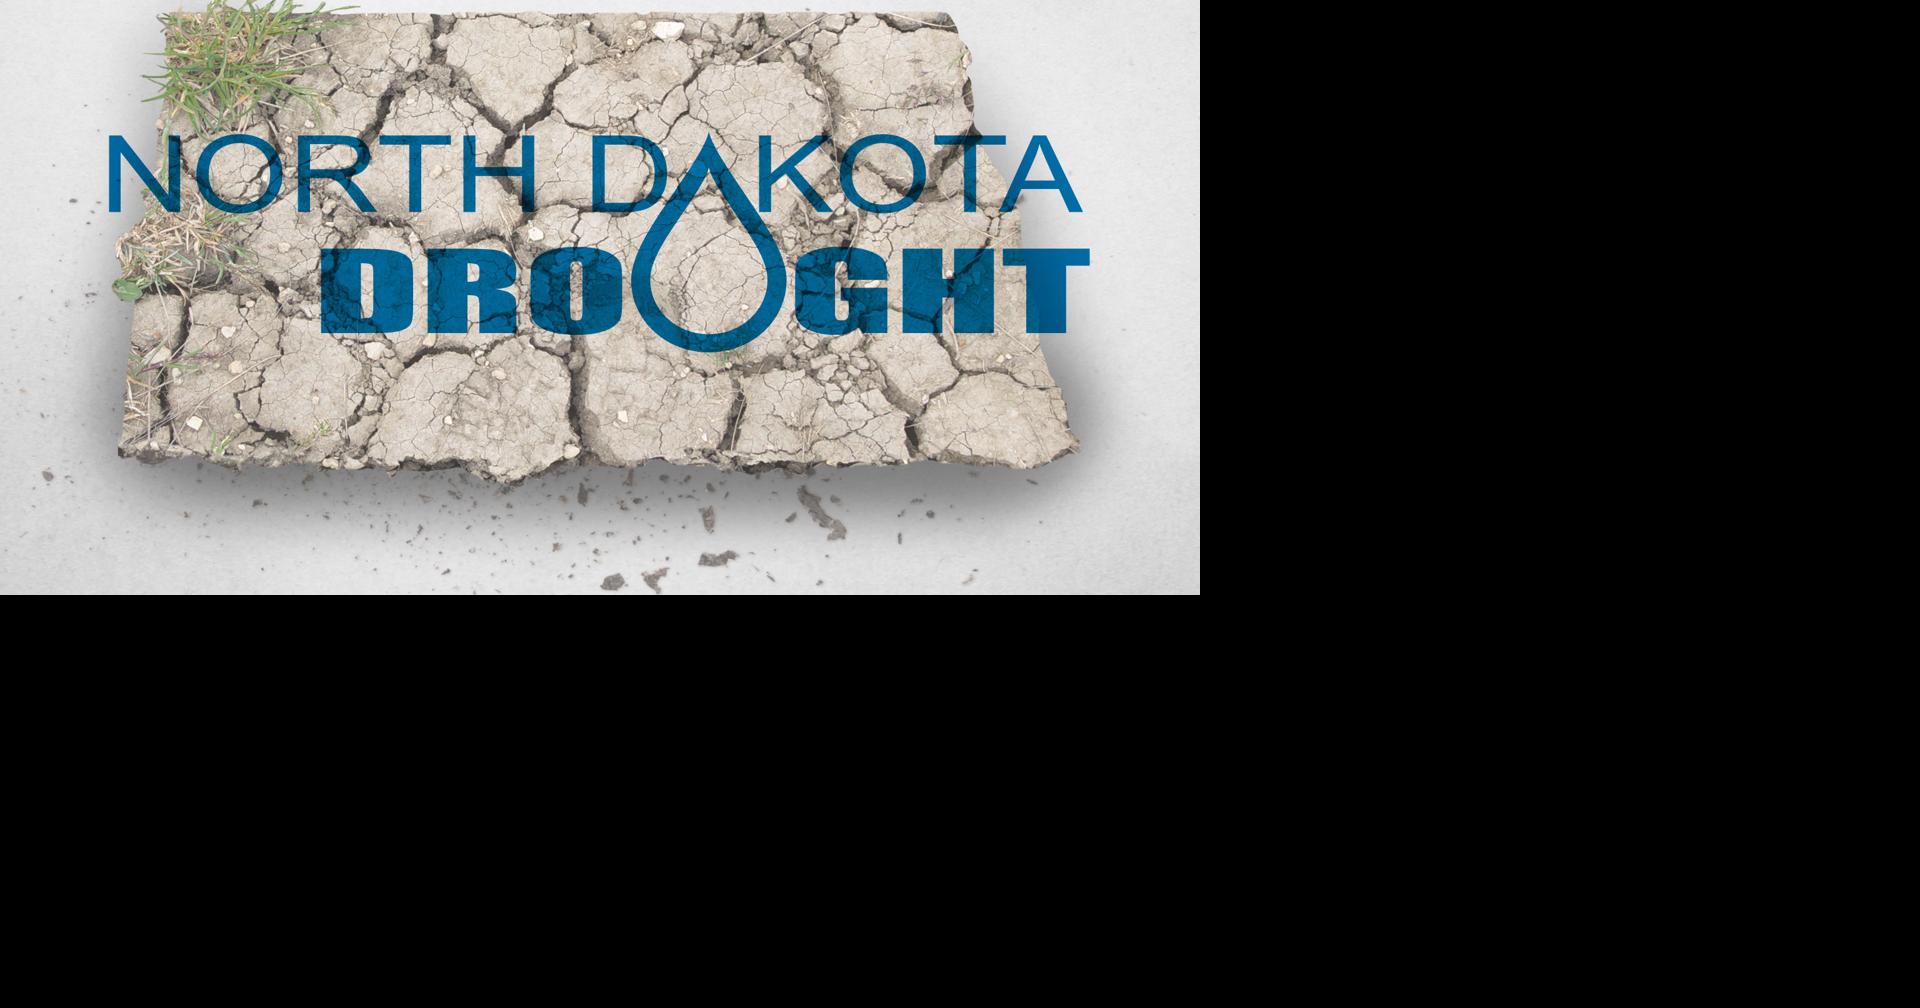 Drought blankets North Dakota over past week; crops degrading, lakes impacted